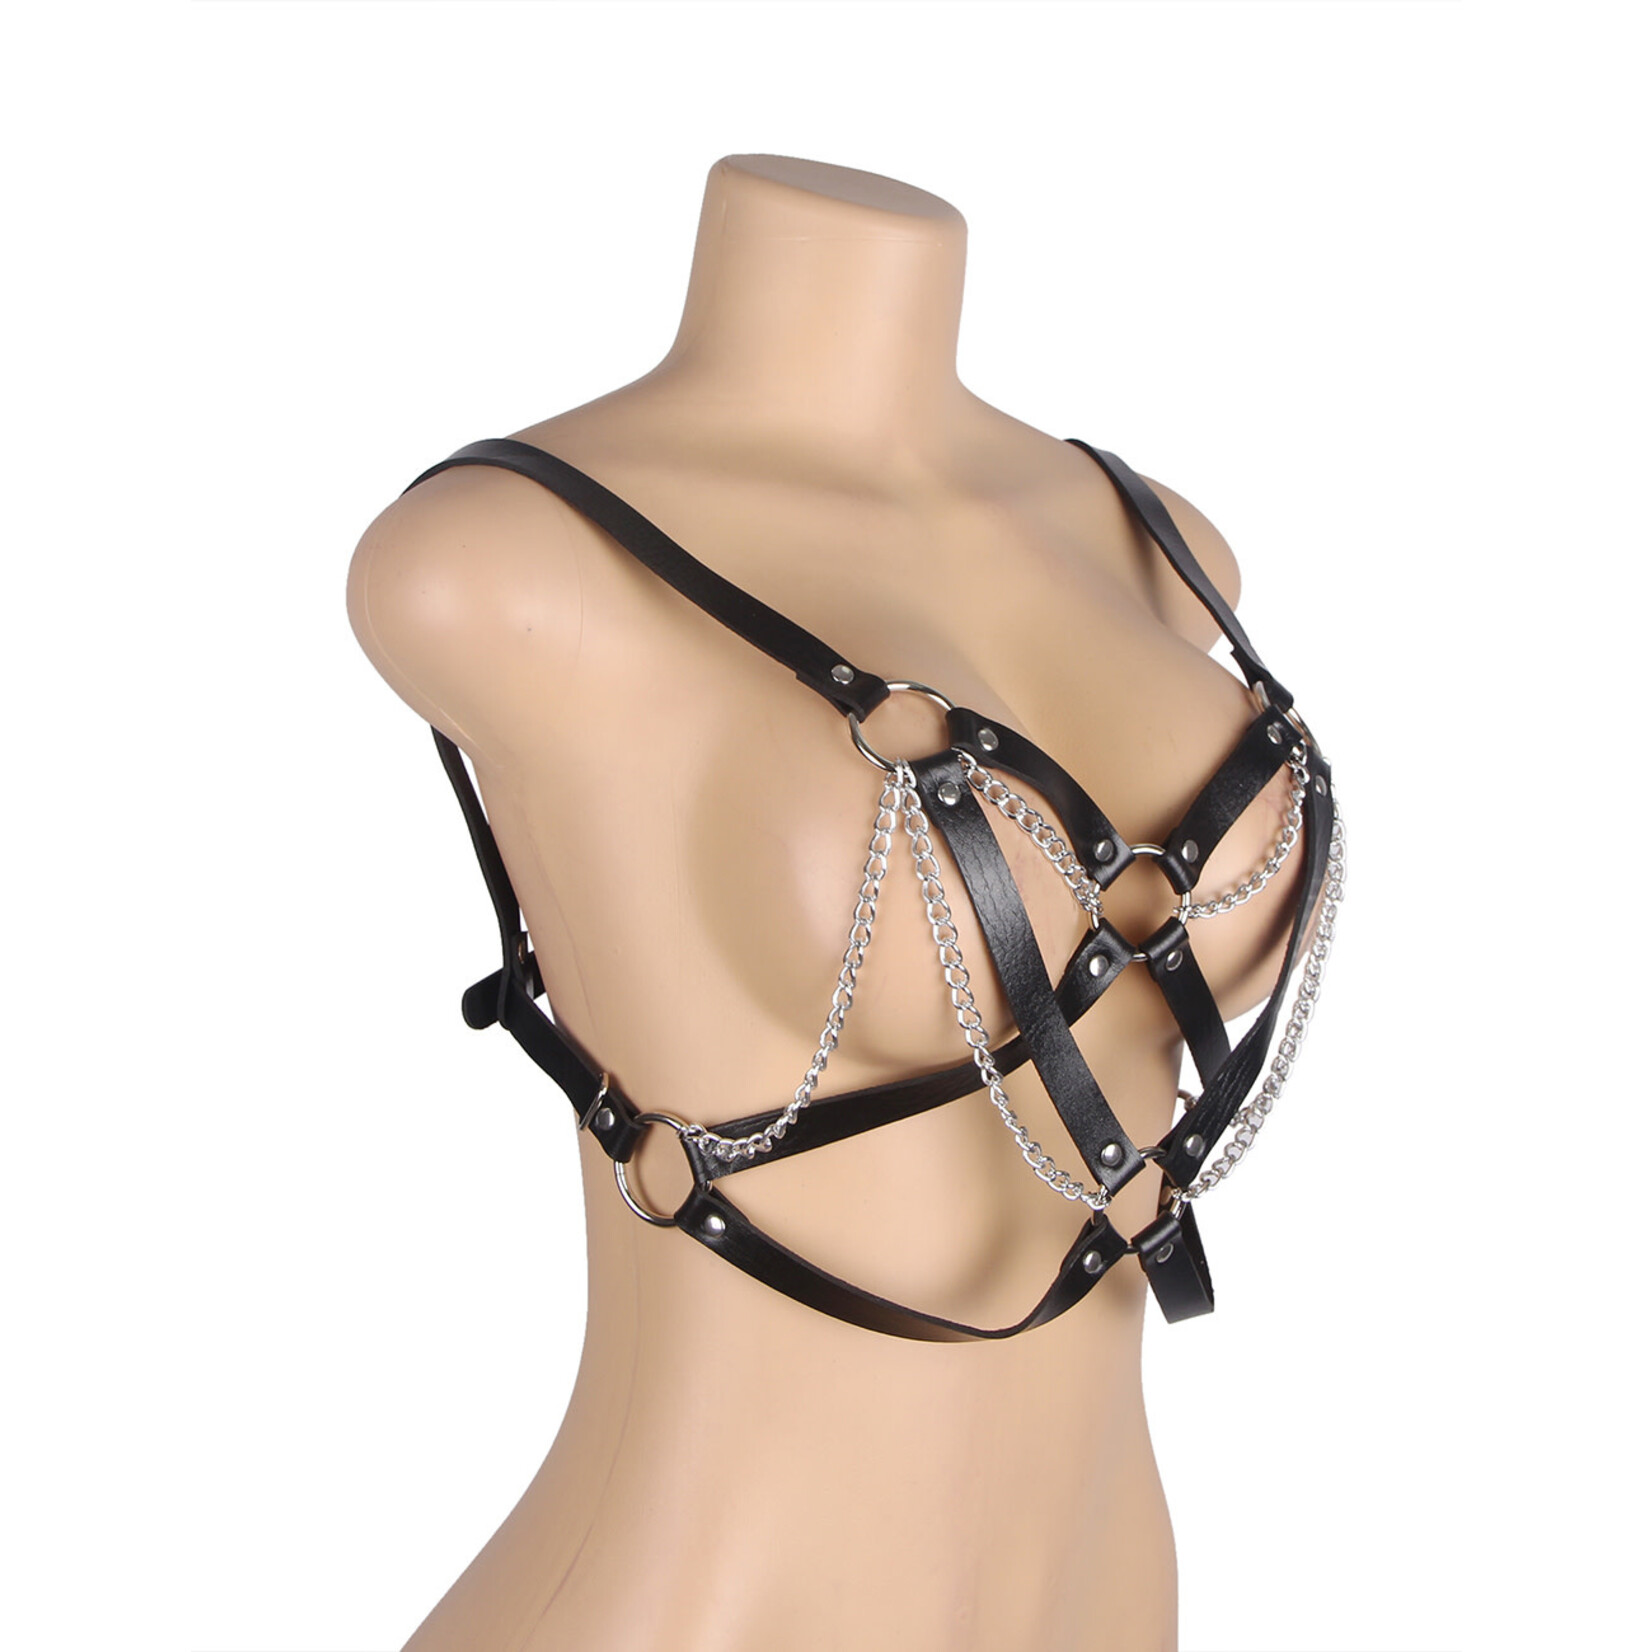 OH YEAH! -  WILD BLACK PUNK BONDAGE BELT WITH METAL PIN BUCKLE ONE SIZE